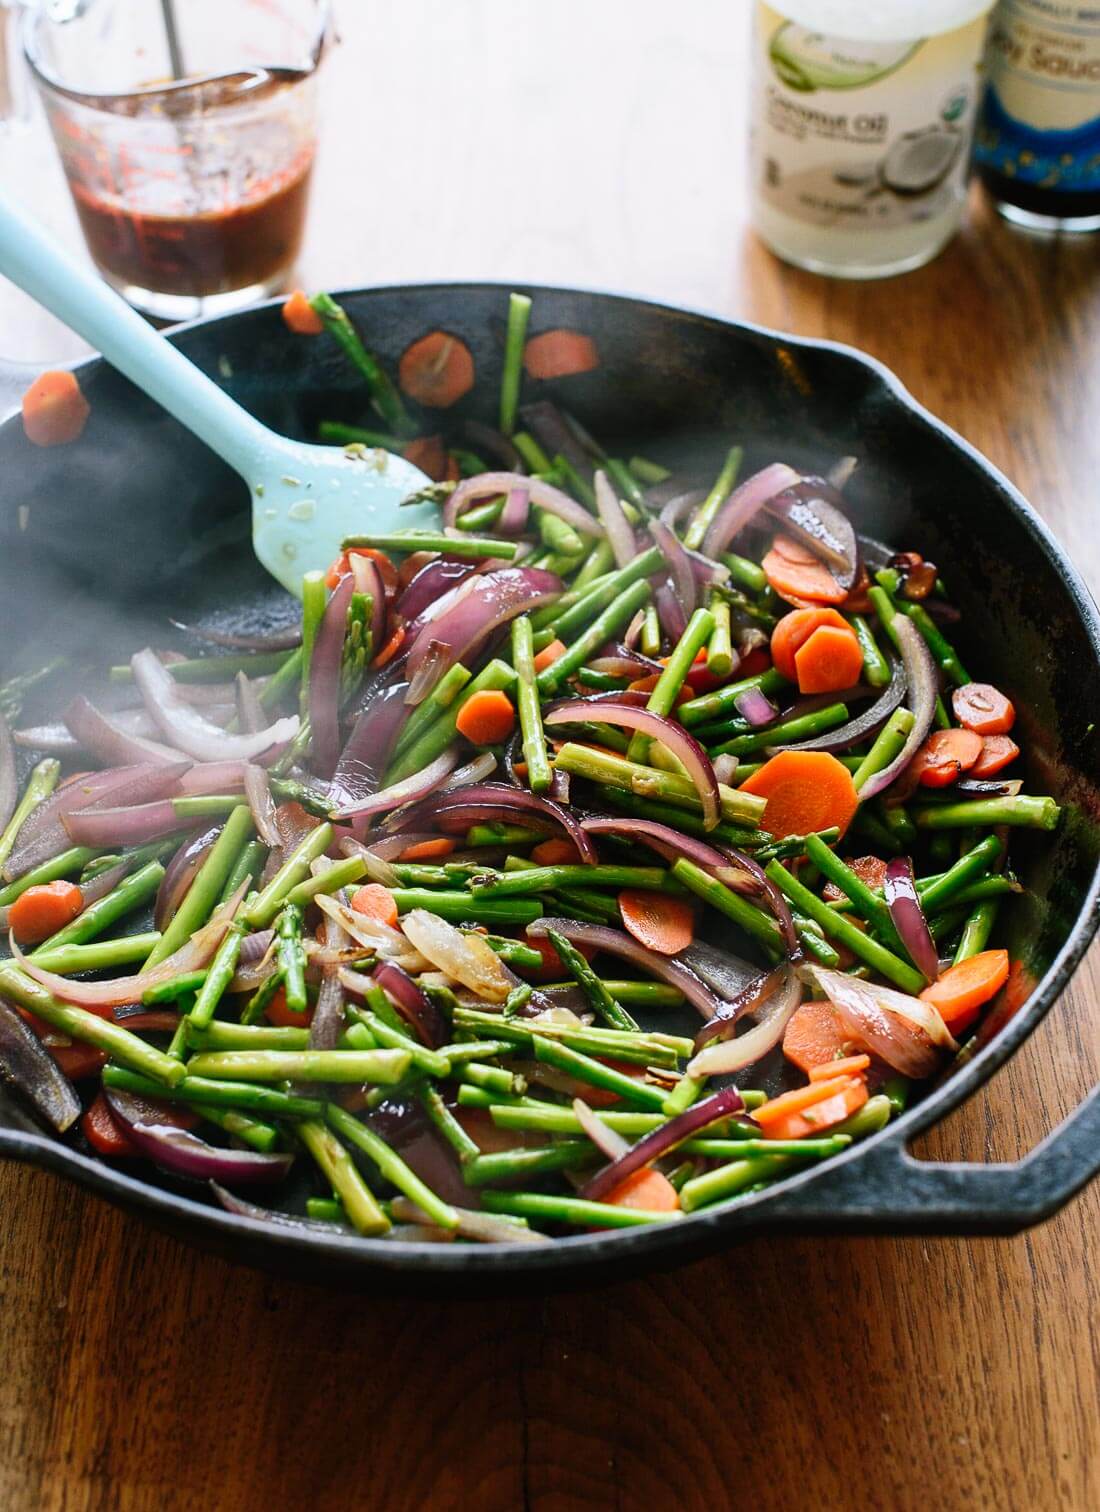 This vegetable stir-fry recipe comes together in no time! To turn this side dish into a complete meal, serve it with brown rice and your choice of protein.